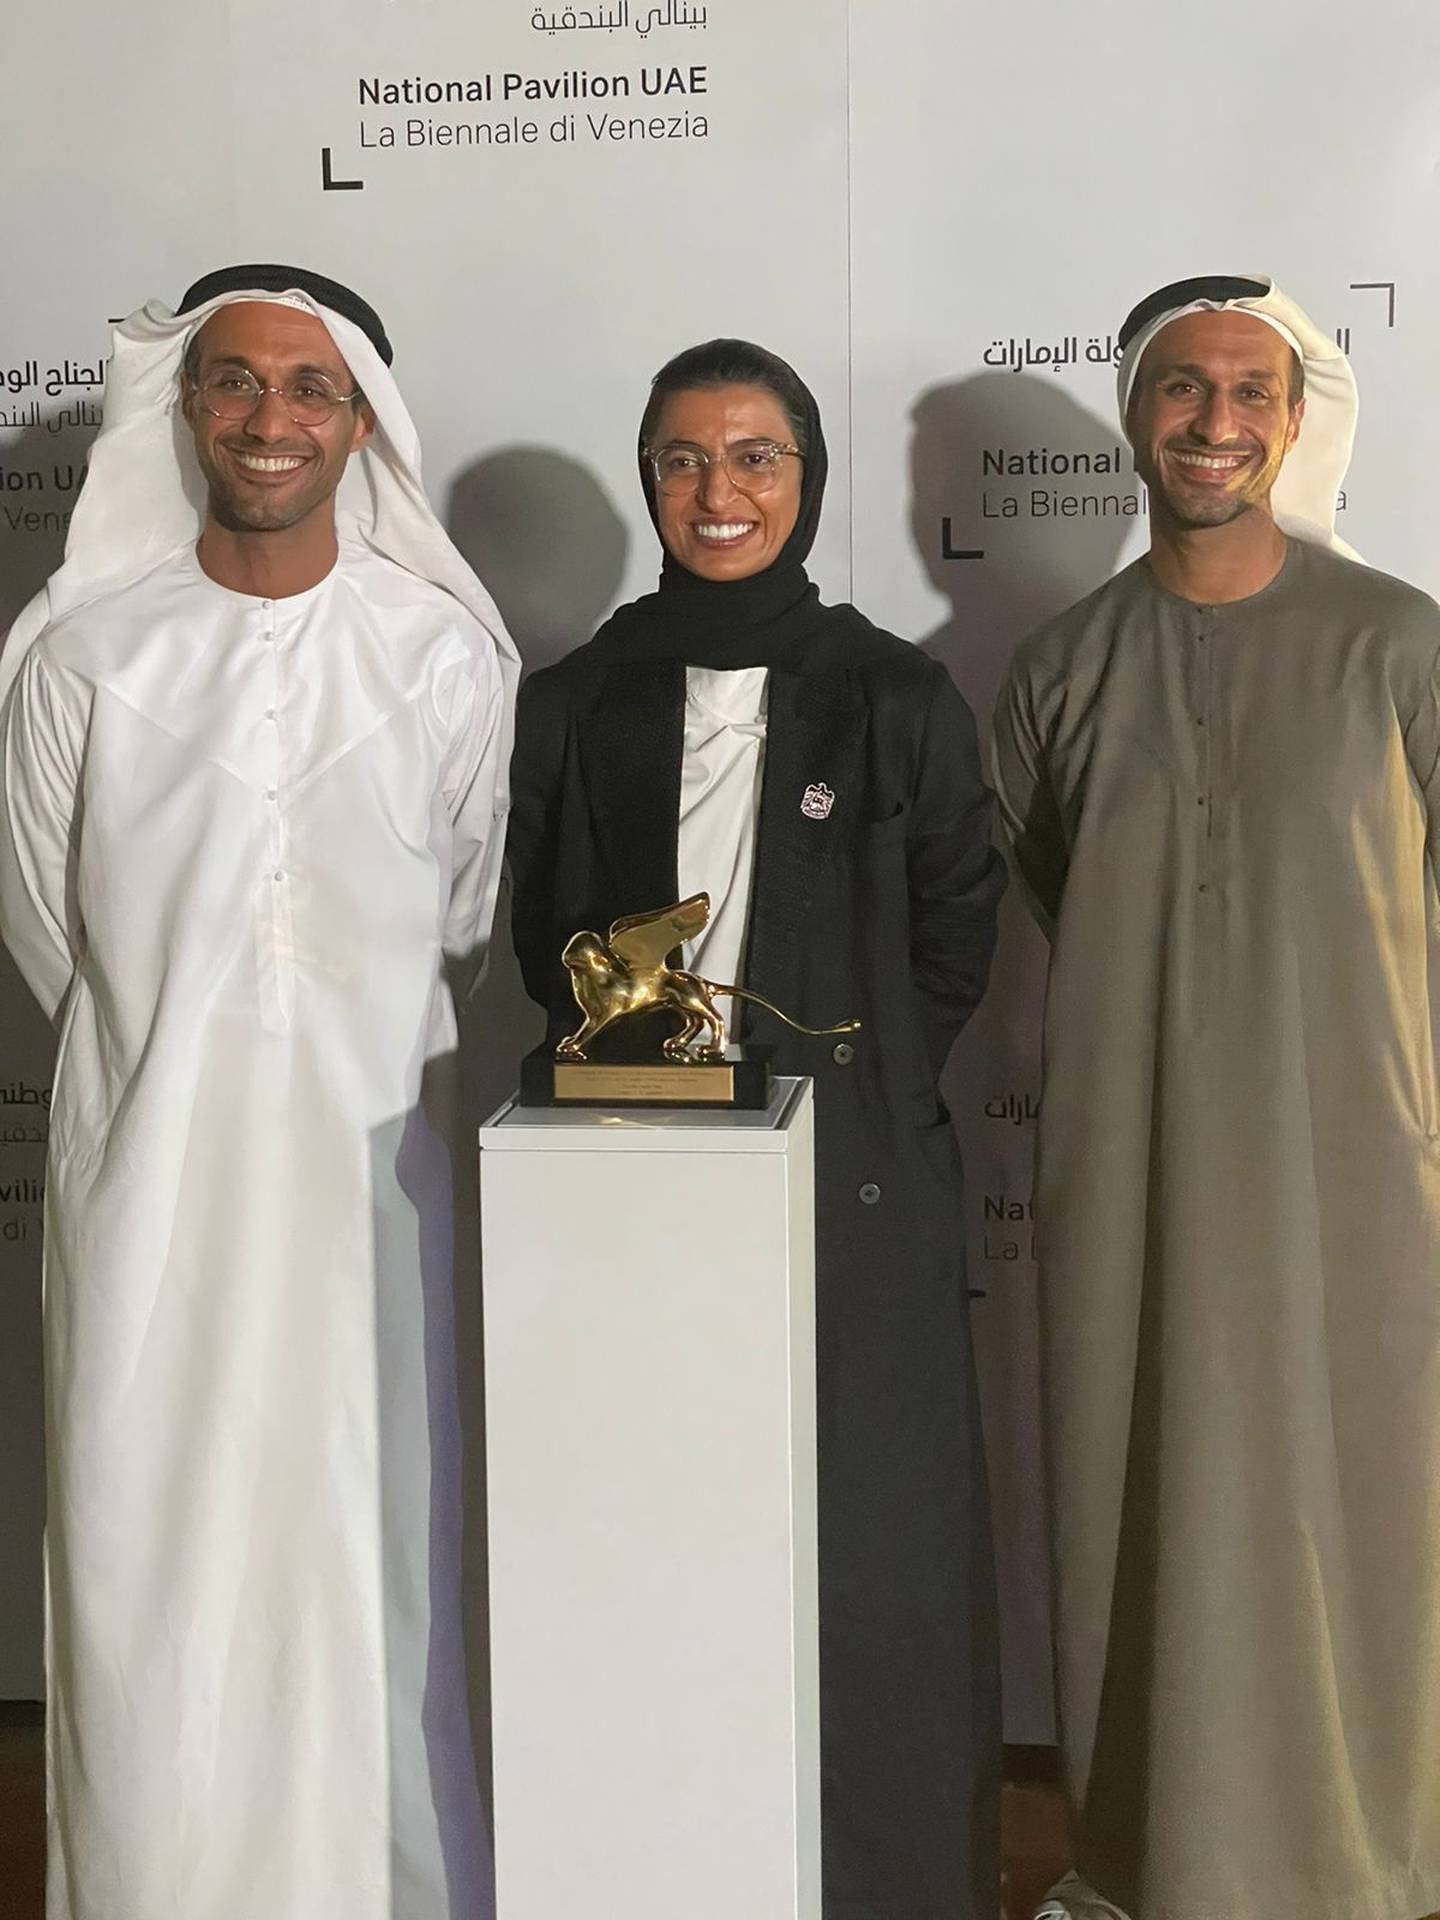 Ahmed and Rashid bin Shabib with Noura Al Kaabi, Minister of Culture and Youth, at the November 27 event at Warehouse 421, commemorating the UAE National Pavilion's Golden Lion win. Photo: Ahmed bin Shabib